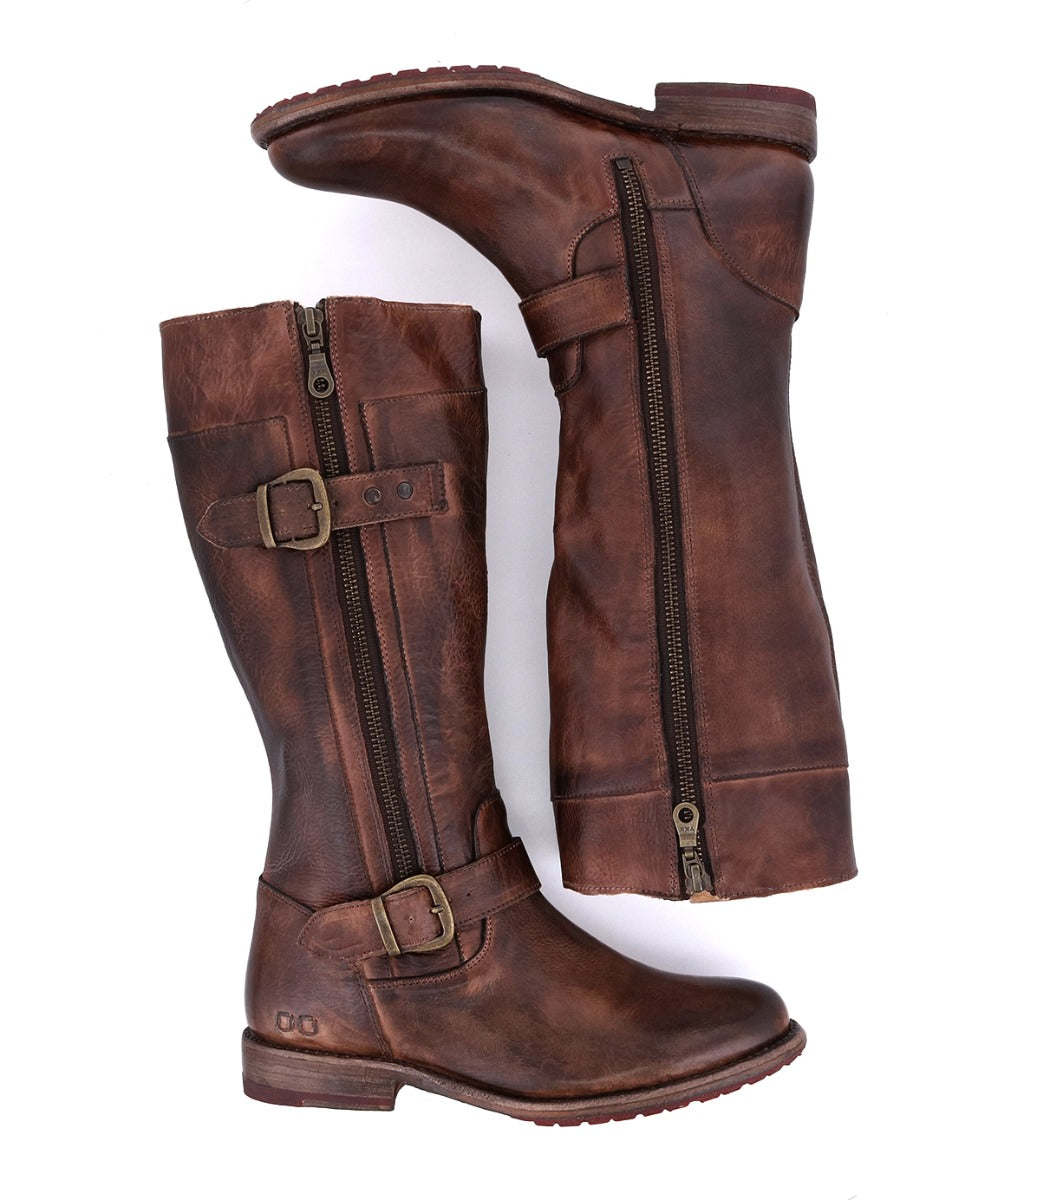 A pair of Gogo Lug teak leather boots with zippers and buckles from Bed Stu.